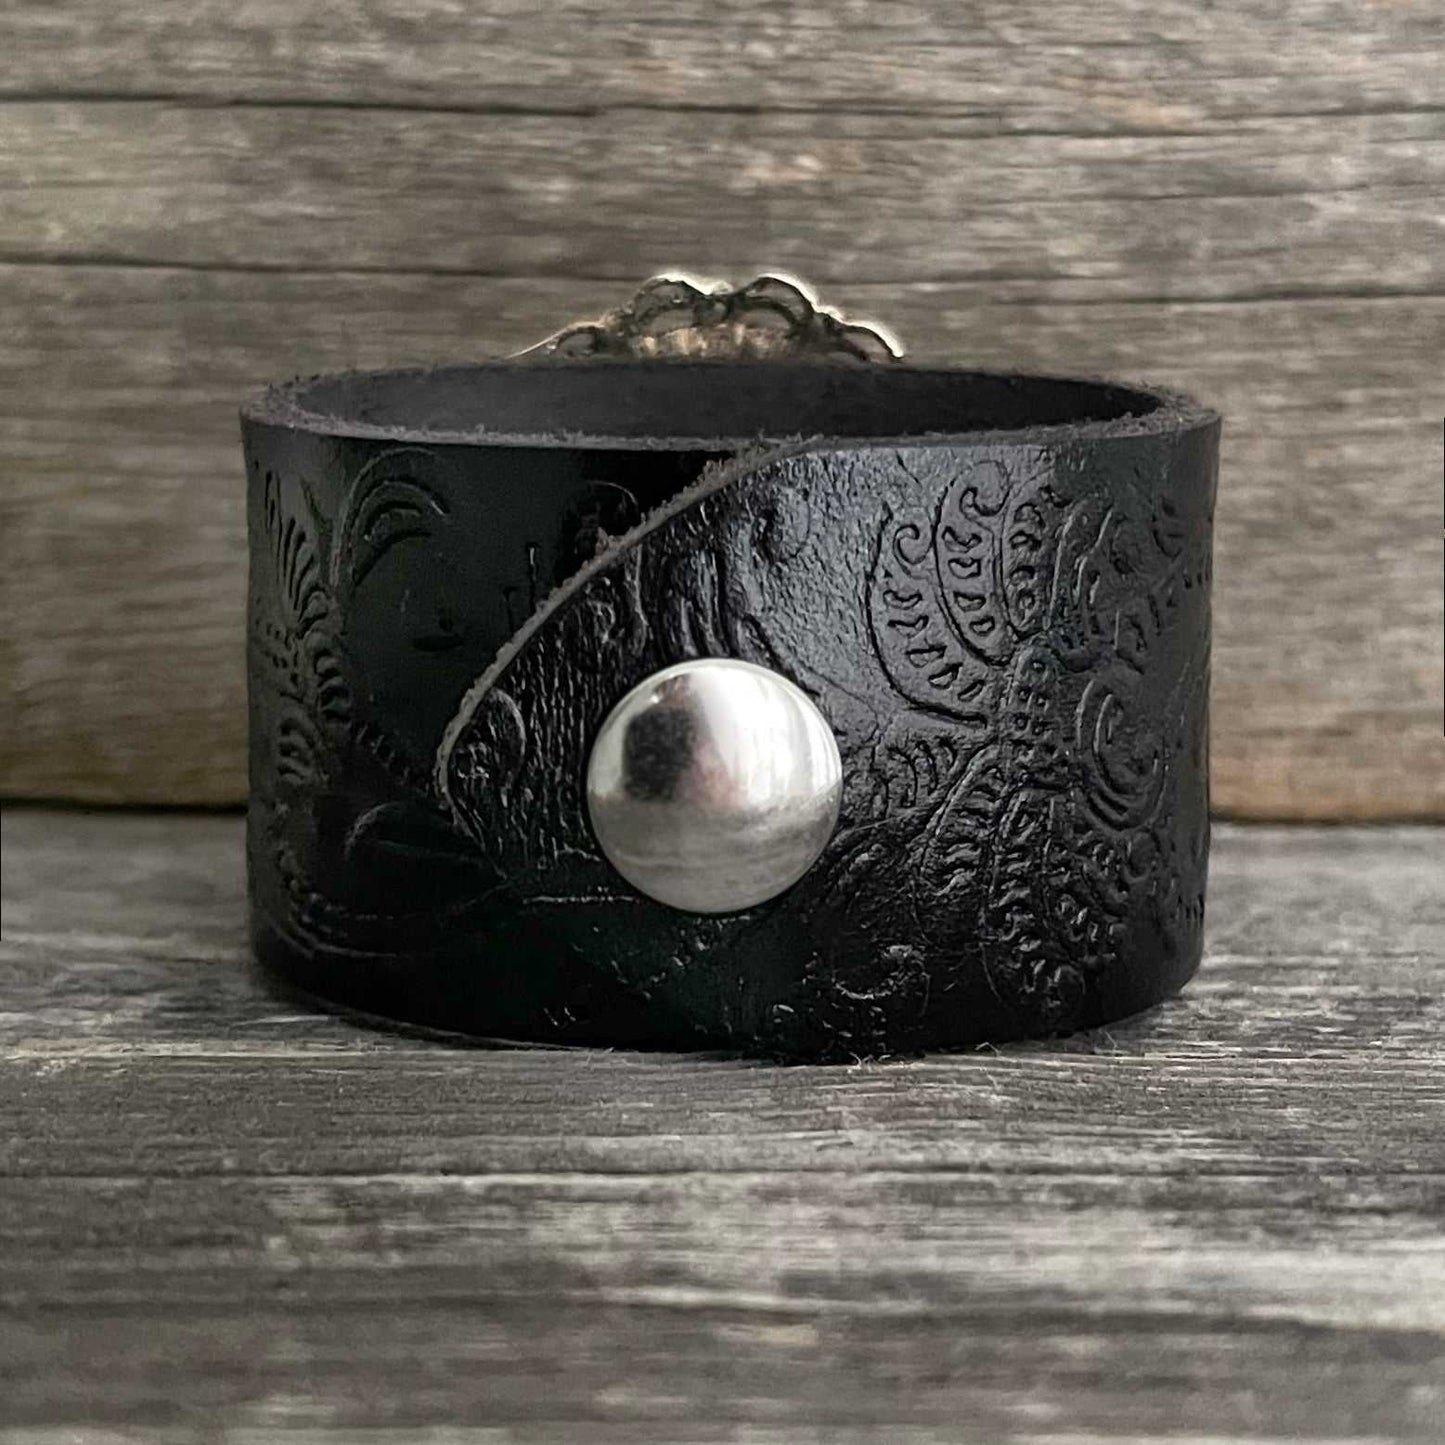 Genuine leather with cameo black rose concho bracelet